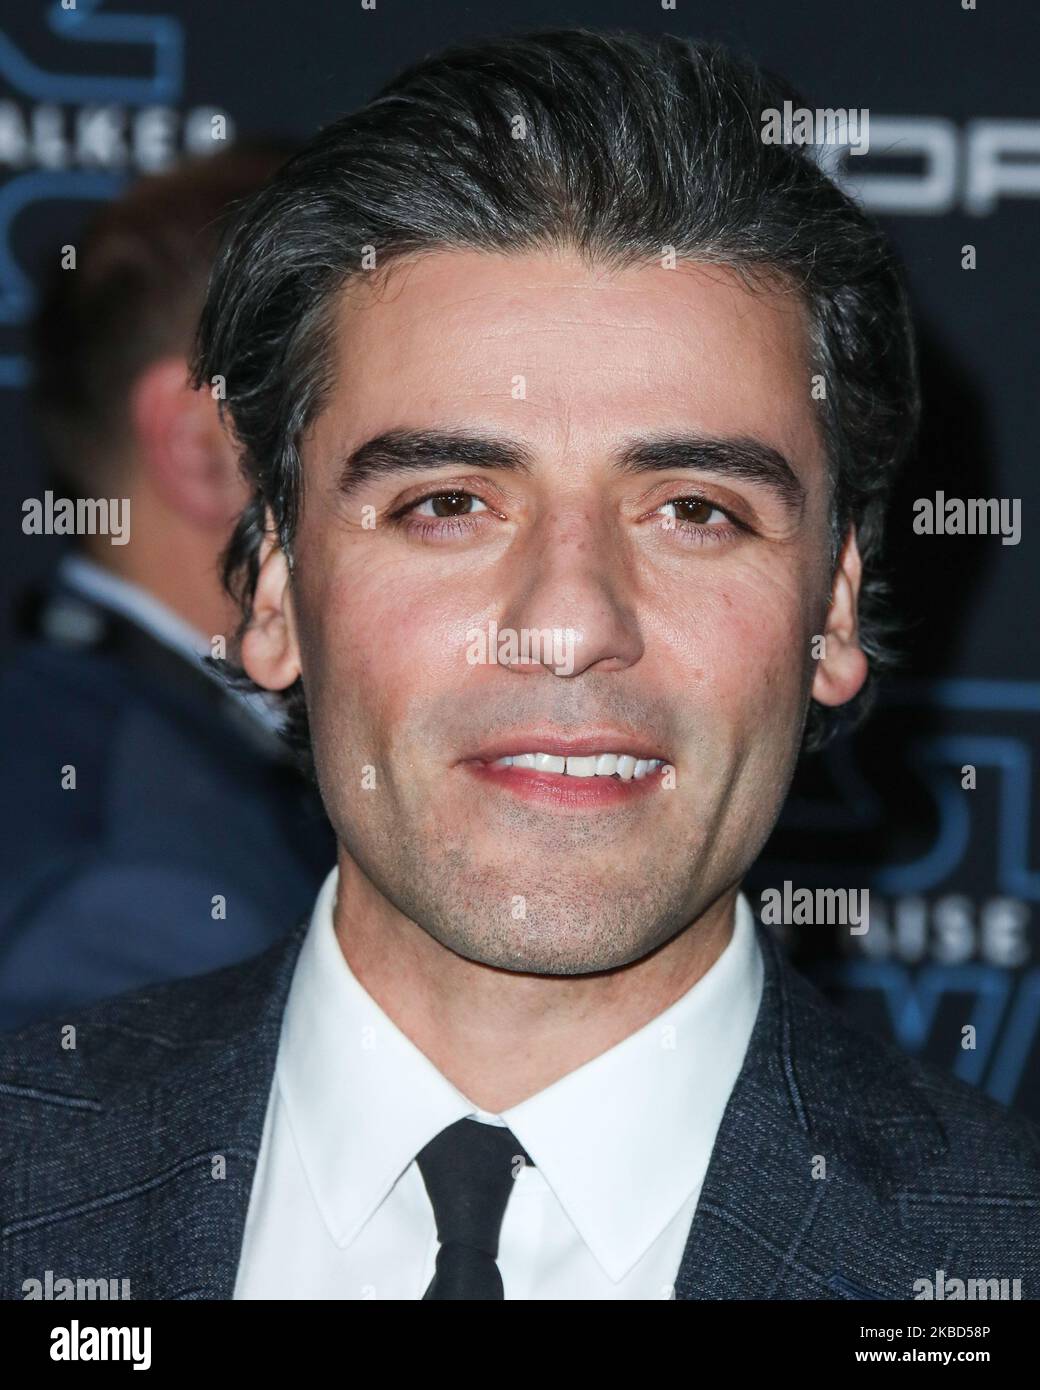 HOLLYWOOD, LOS ANGELES, CALIFORNIA, USA - DECEMBER 16: Actor Oscar Isaac arrives at the World Premiere Of Disney's 'Star Wars: The Rise Of Skywalker' held at the El Capitan Theatre on December 16, 2019 in Hollywood, Los Angeles, California, United States. (Photo by Xavier Collin/Image Press Agency/NurPhoto) Stock Photo